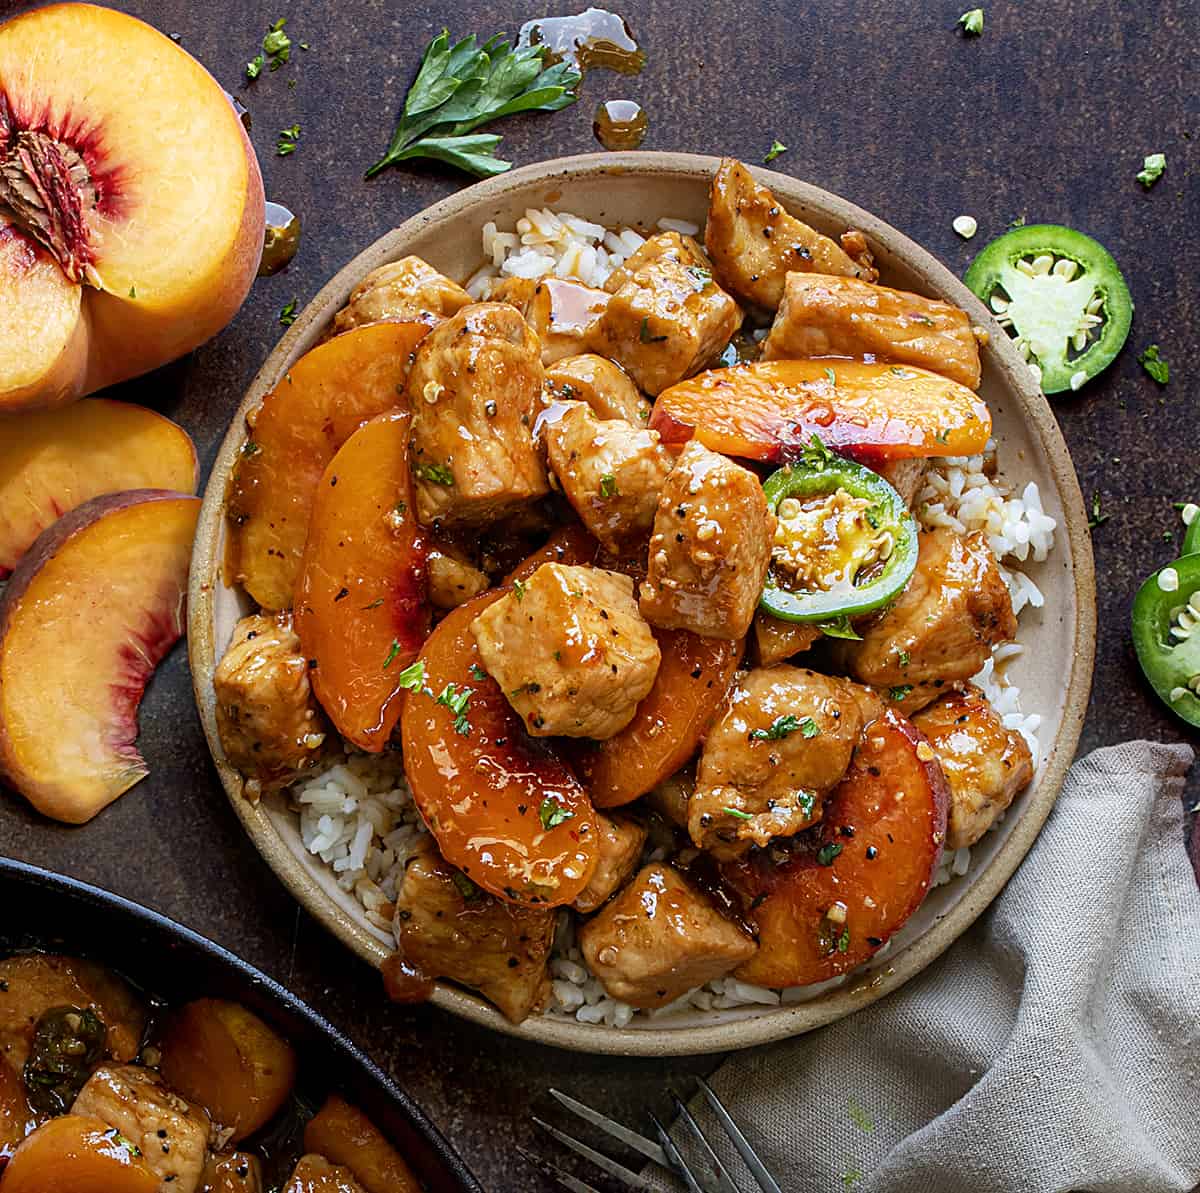 Plate of Jalapeno Peach Pork Bites on a Bed of Rice Next to Fresh Peaches from Overhead.